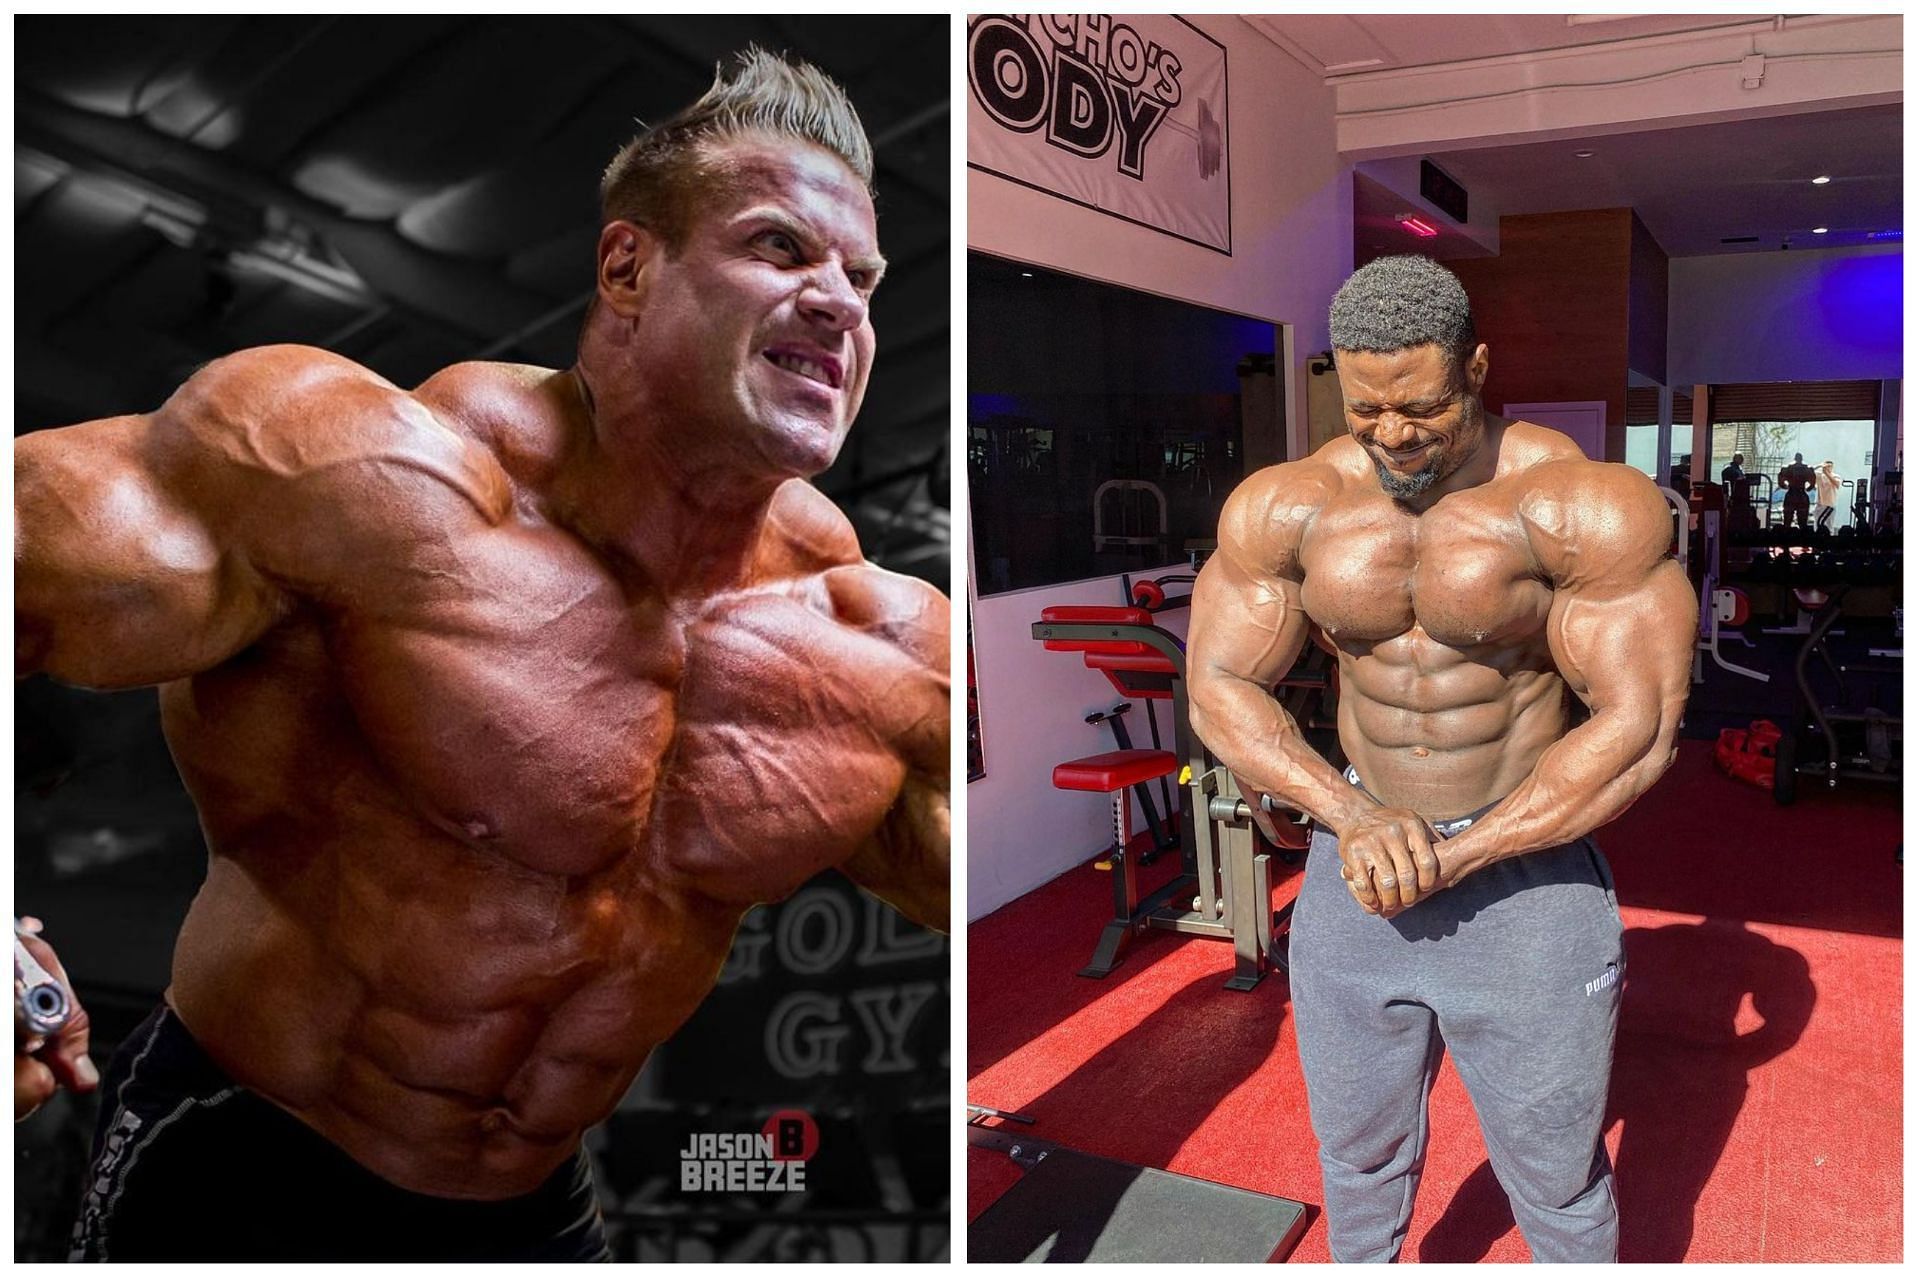 Mr. Olympia in the making” - Jay Cutler backs Andrew Jacked to